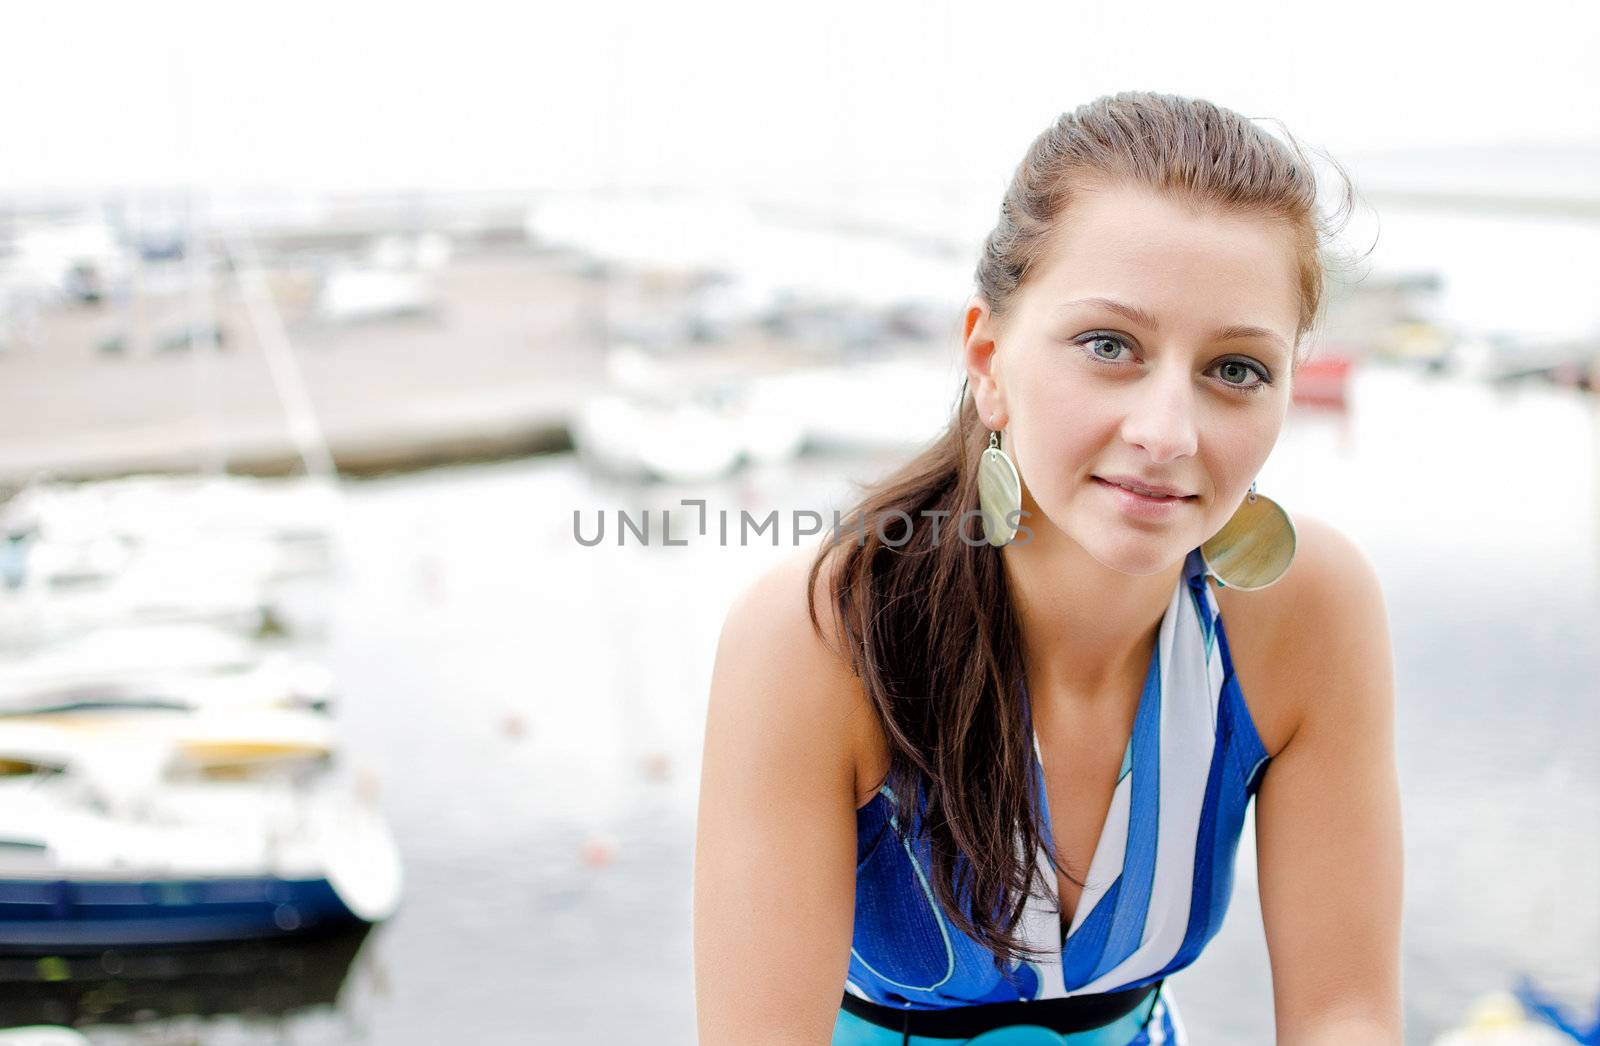 Pretty girl portrait, against of the pier with yachts.